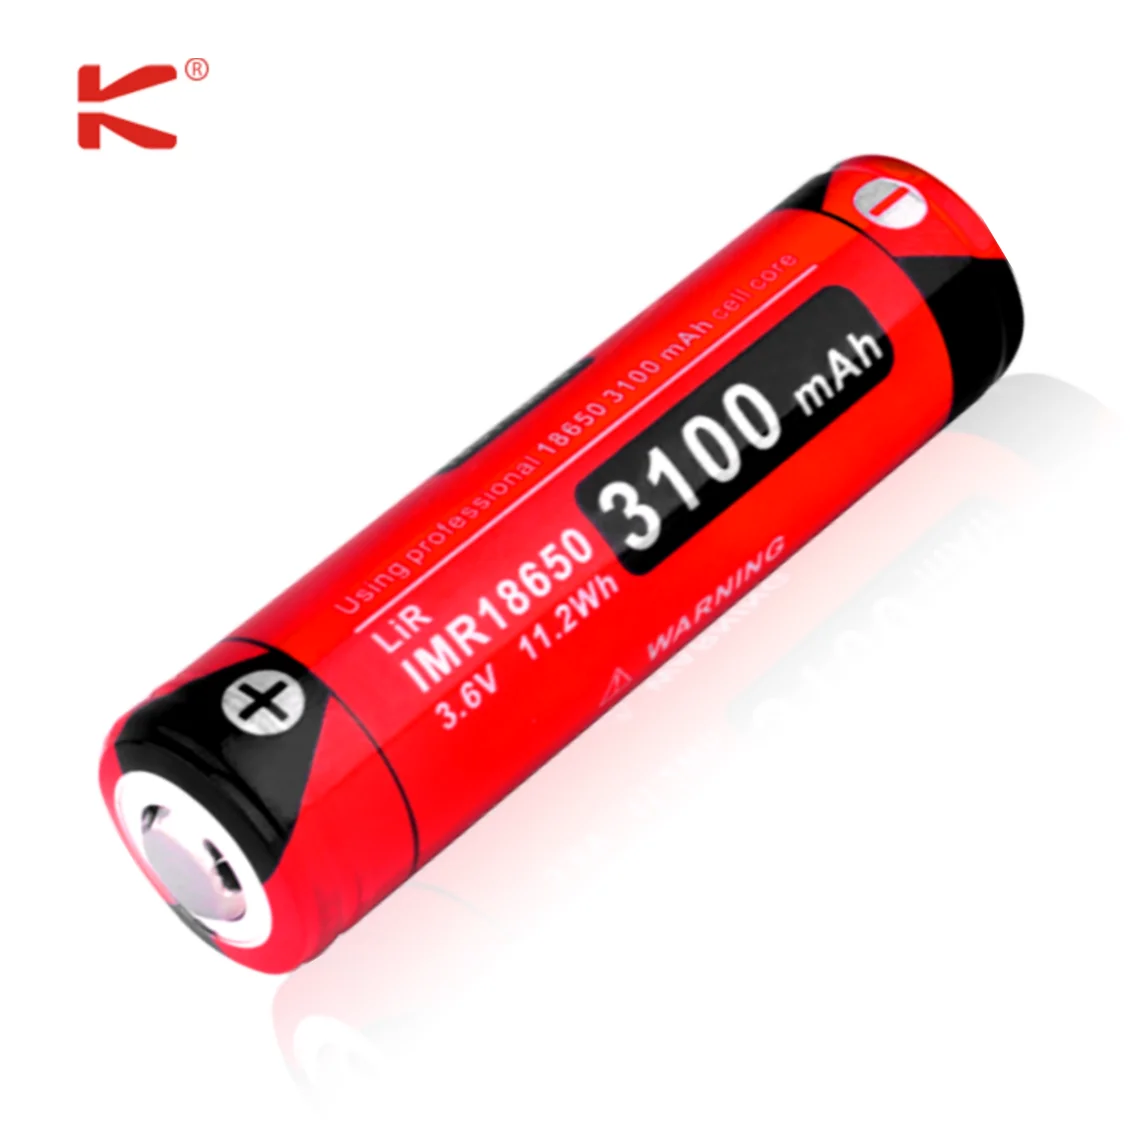 Klarus 18GT-IMR31 3100 mAh High Quality IMR 18650 Battery for XT2CR PRO  XT11GT  KLARUS XT11X XT11S  XT11GT Pro LED Flashlight